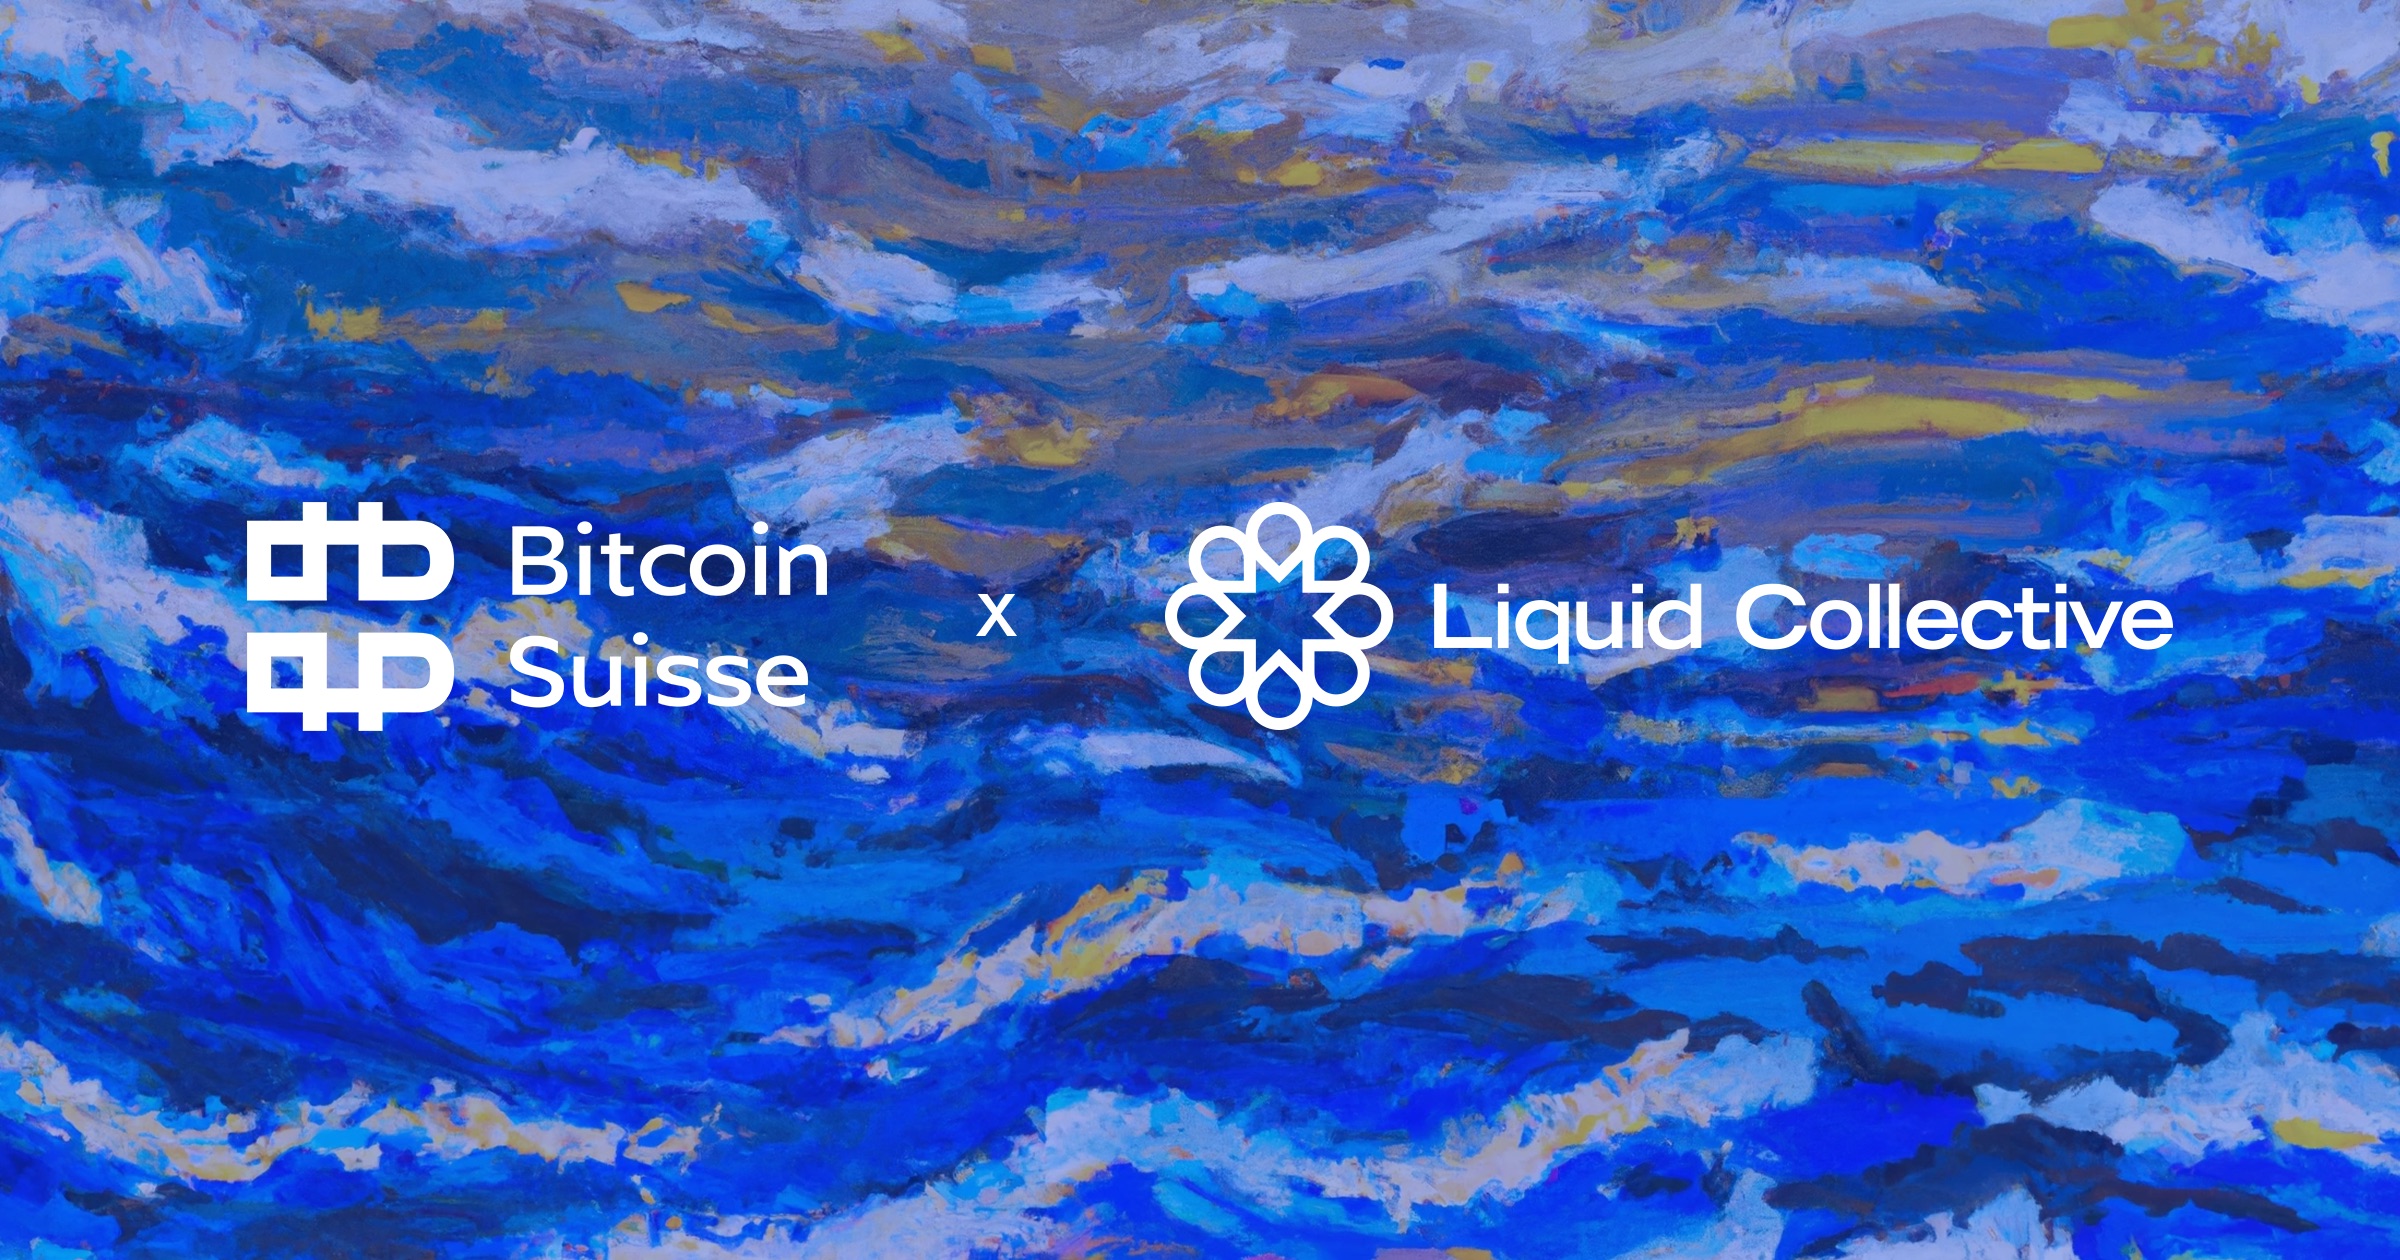 January: Bitcoin Suisse Joins Liquid Collective 